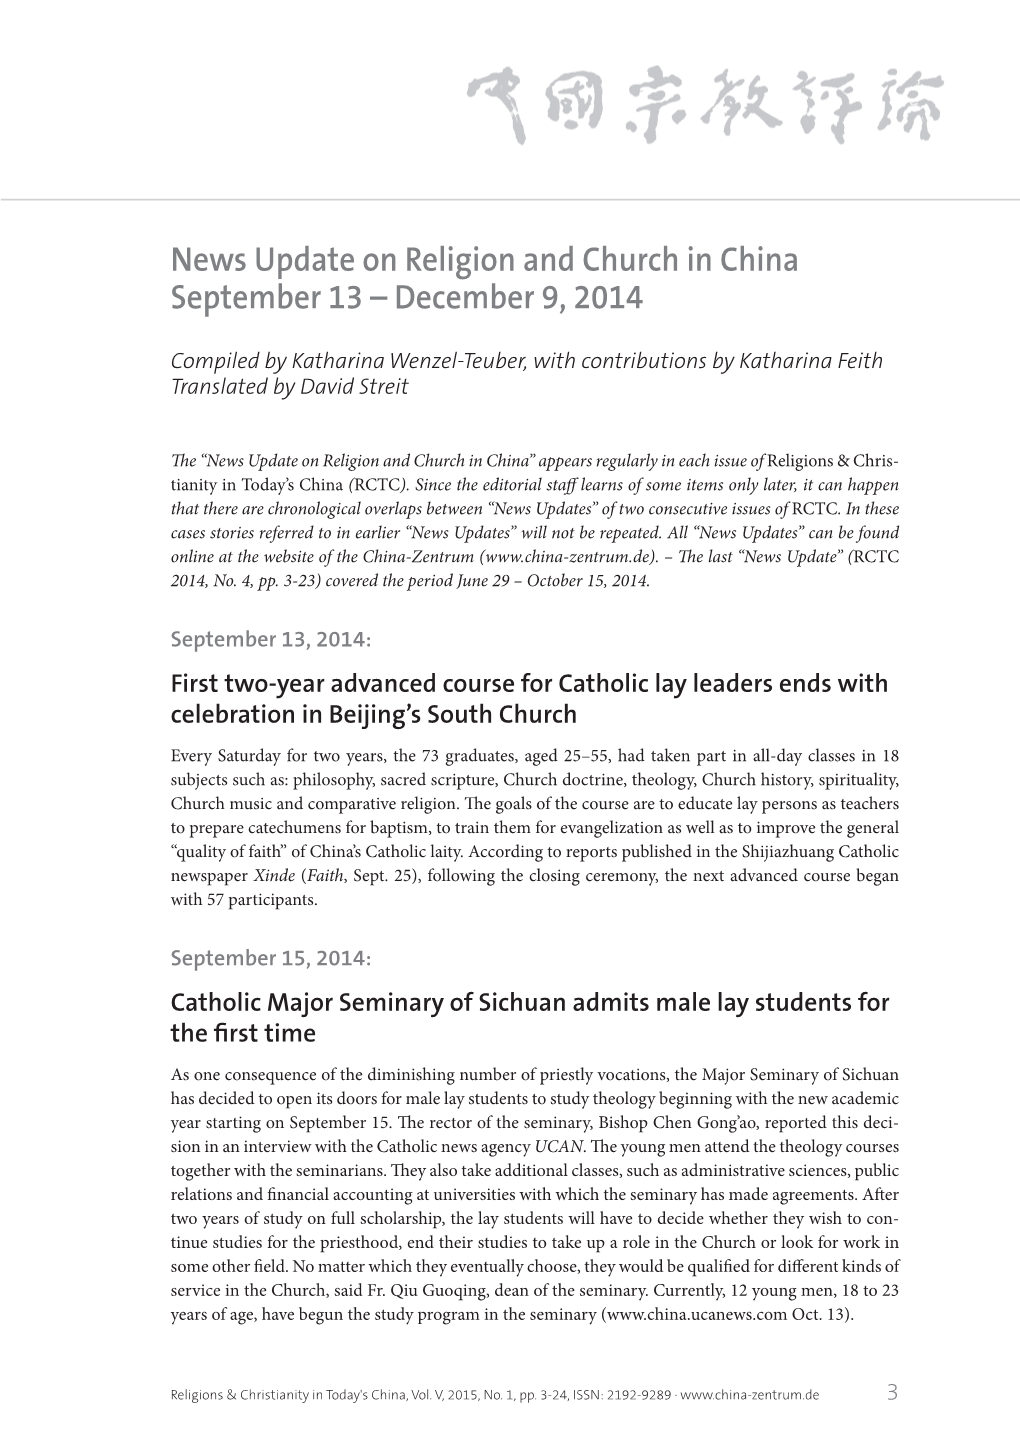 News Update on Religion and Church in China September 13 – December 9, 2014